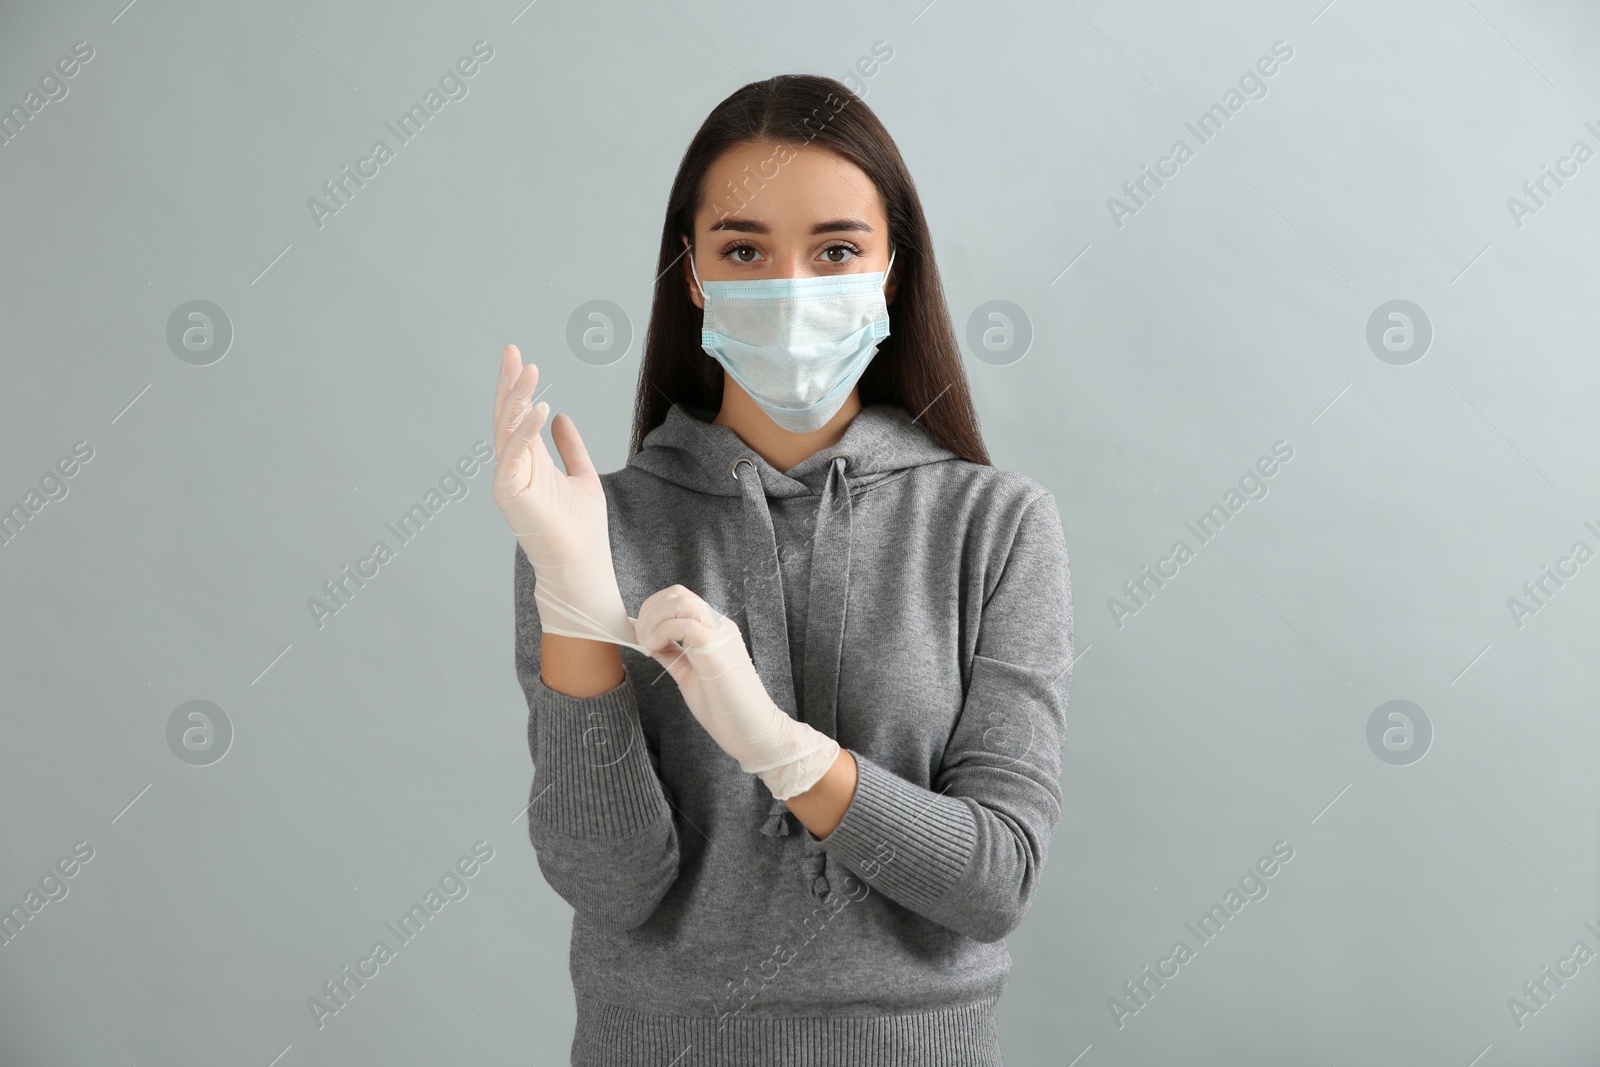 Photo of Woman in protective face mask putting on medical gloves against grey background